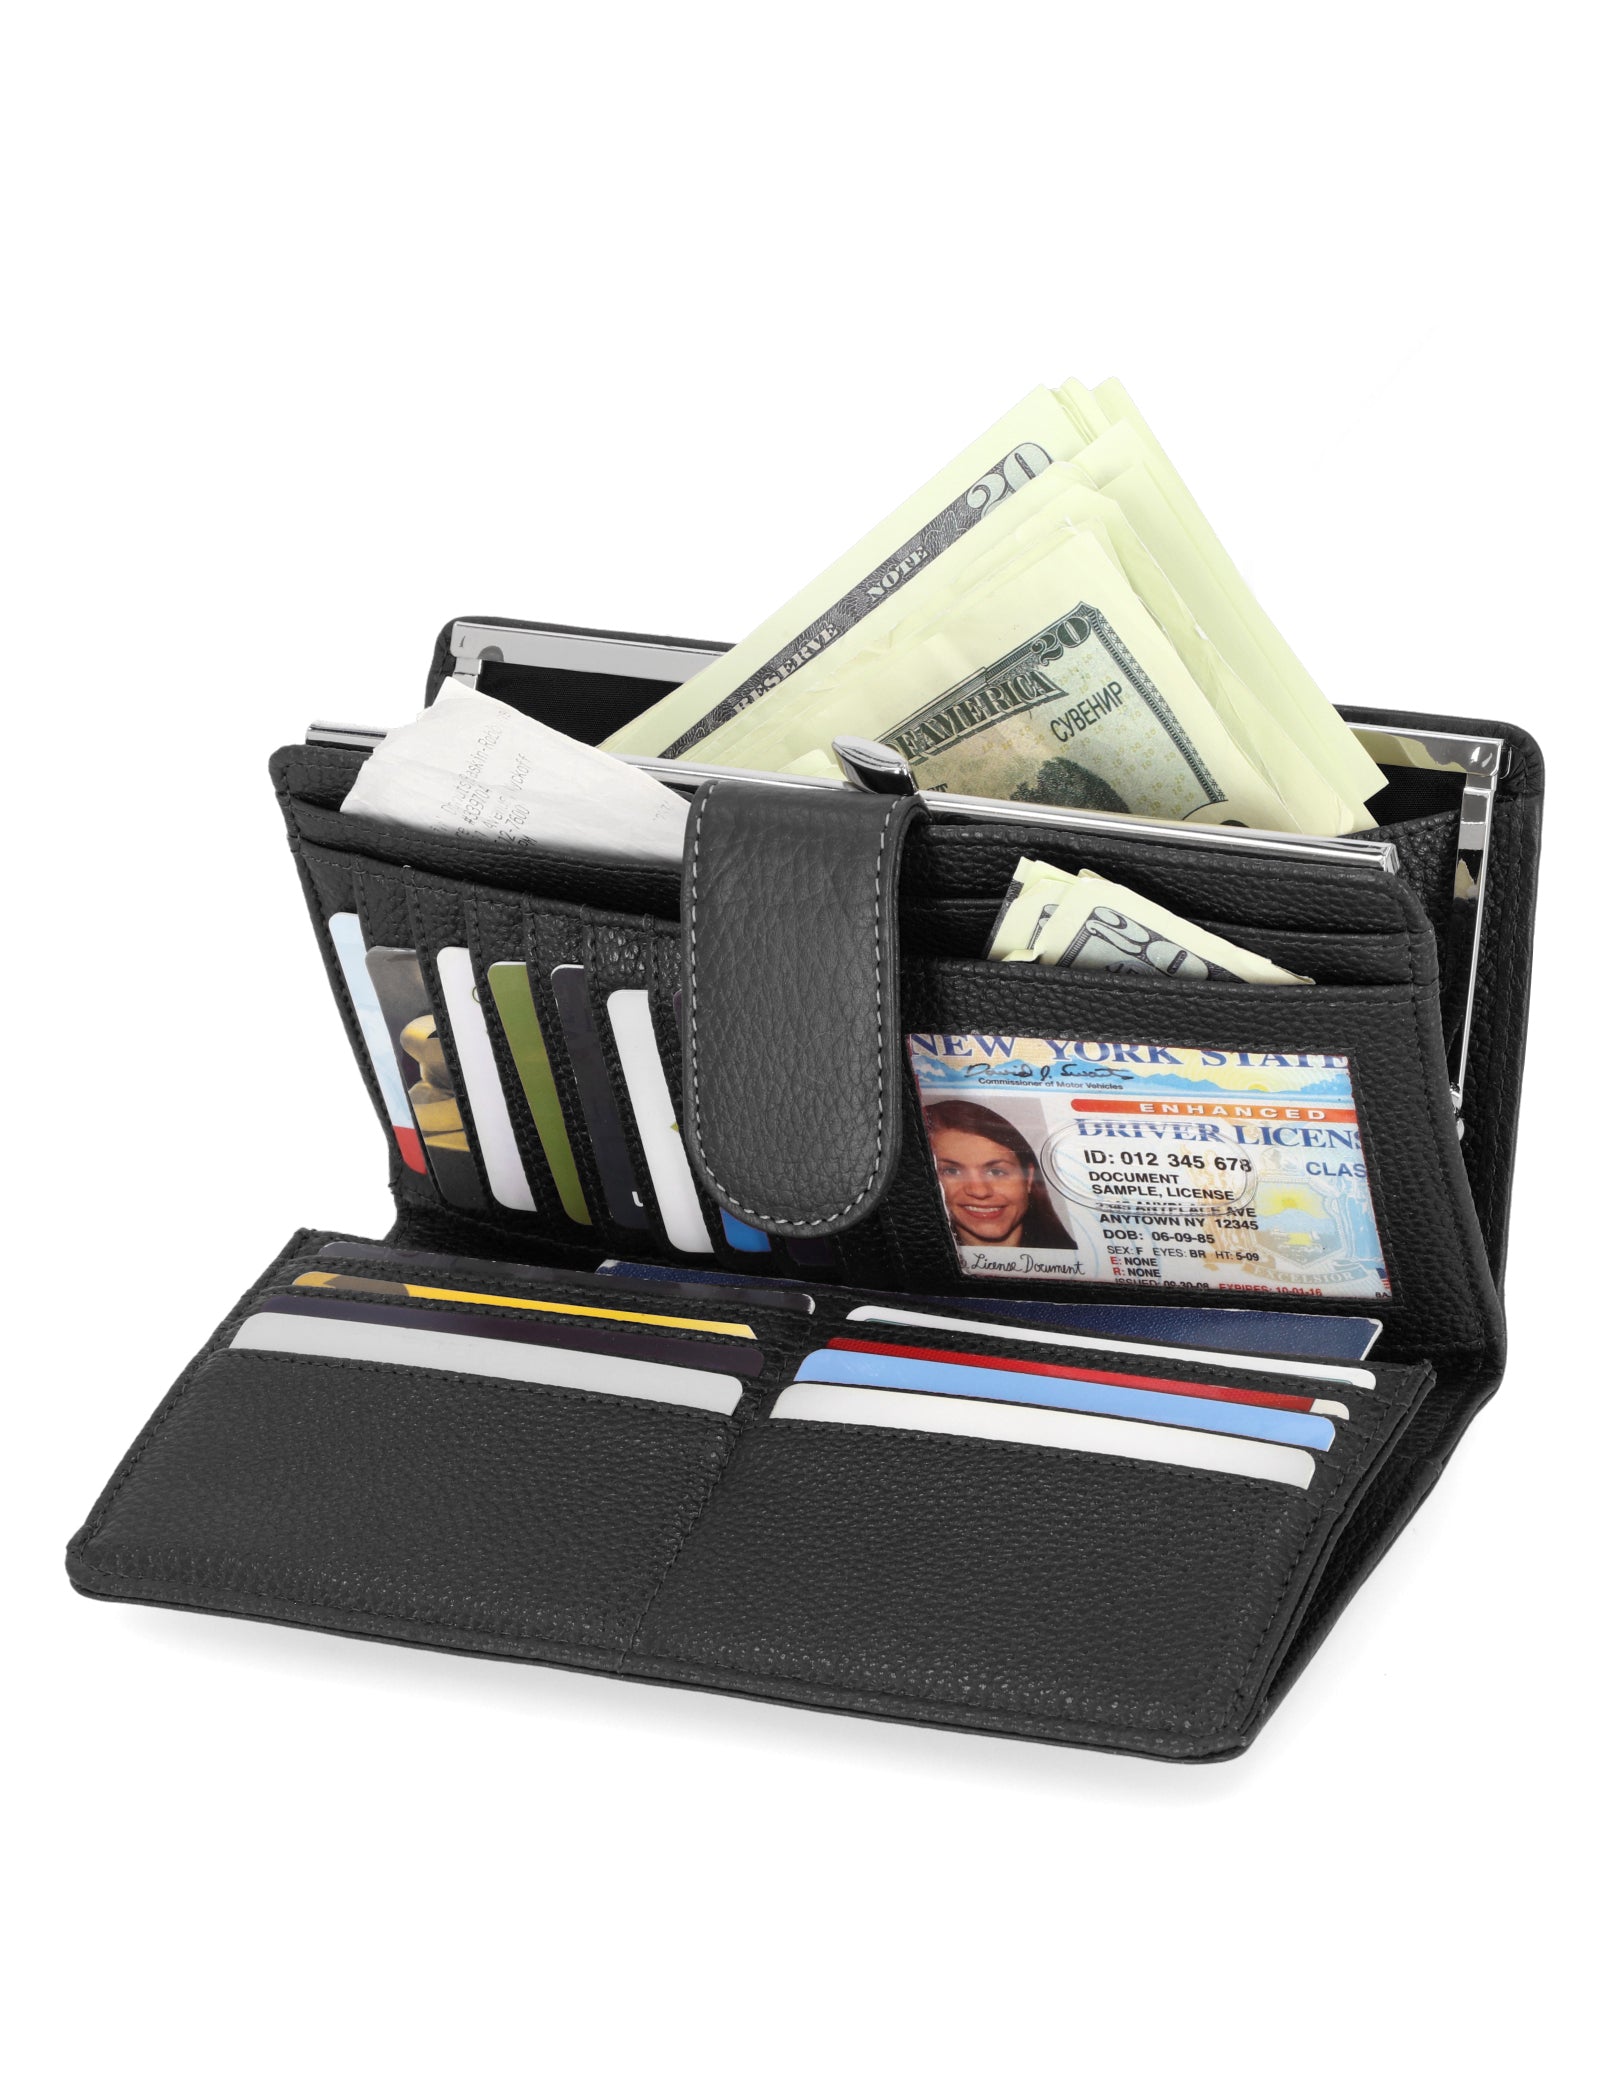 Mundi Wallets - Rio Checkbook Clutch - Women's Wallets - Genuine Leather Wallets For Women - RFID Protection - Organizer Wallets - Multiple Pockets and compartments - Black